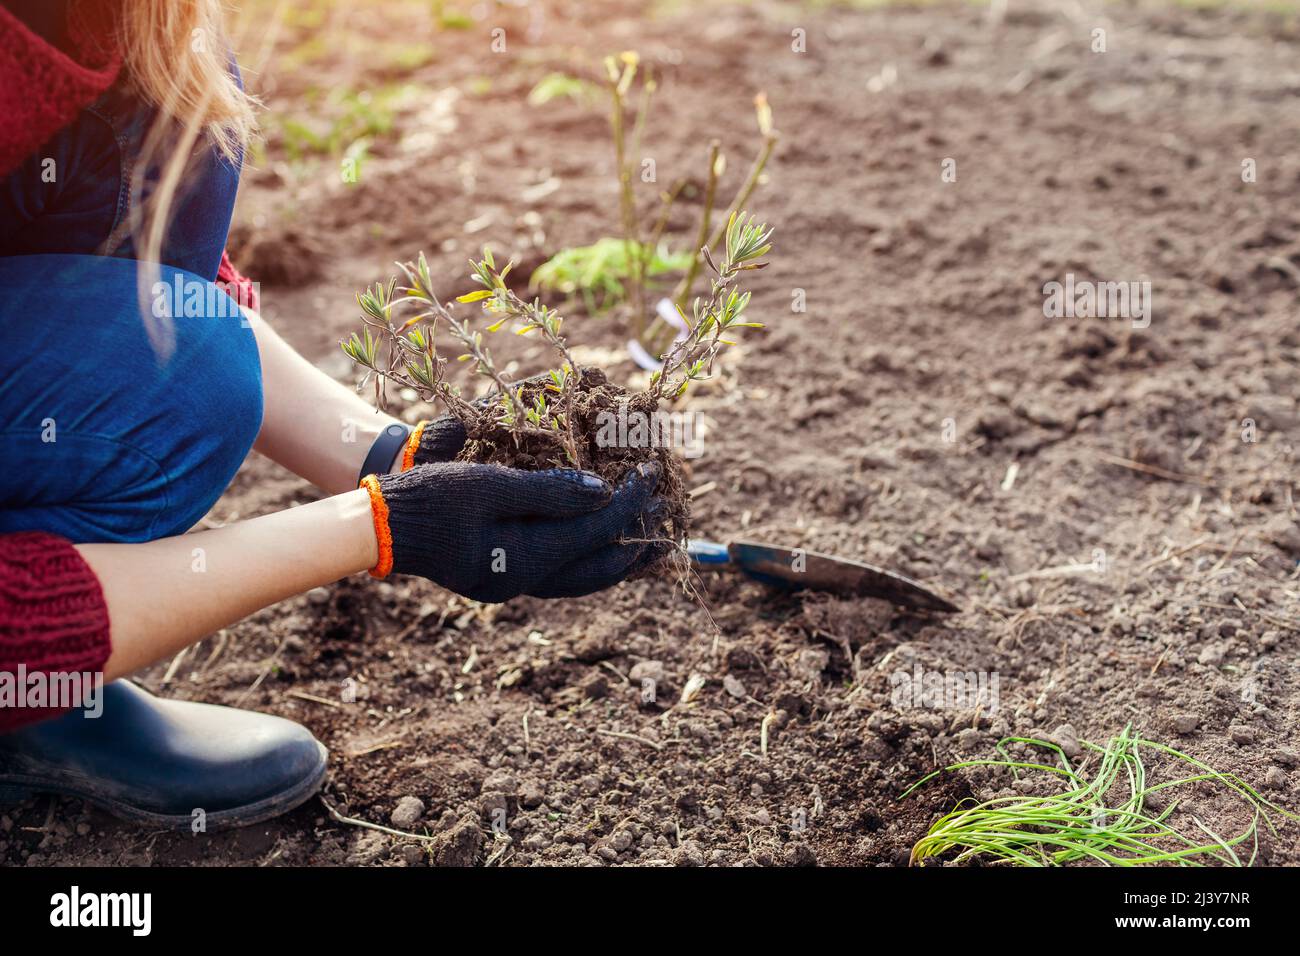 Transplanting lavender seedlings into soil. Gardener plants young sprouts in ground in spring garden using shovel. Outdoor springtime work Stock Photo